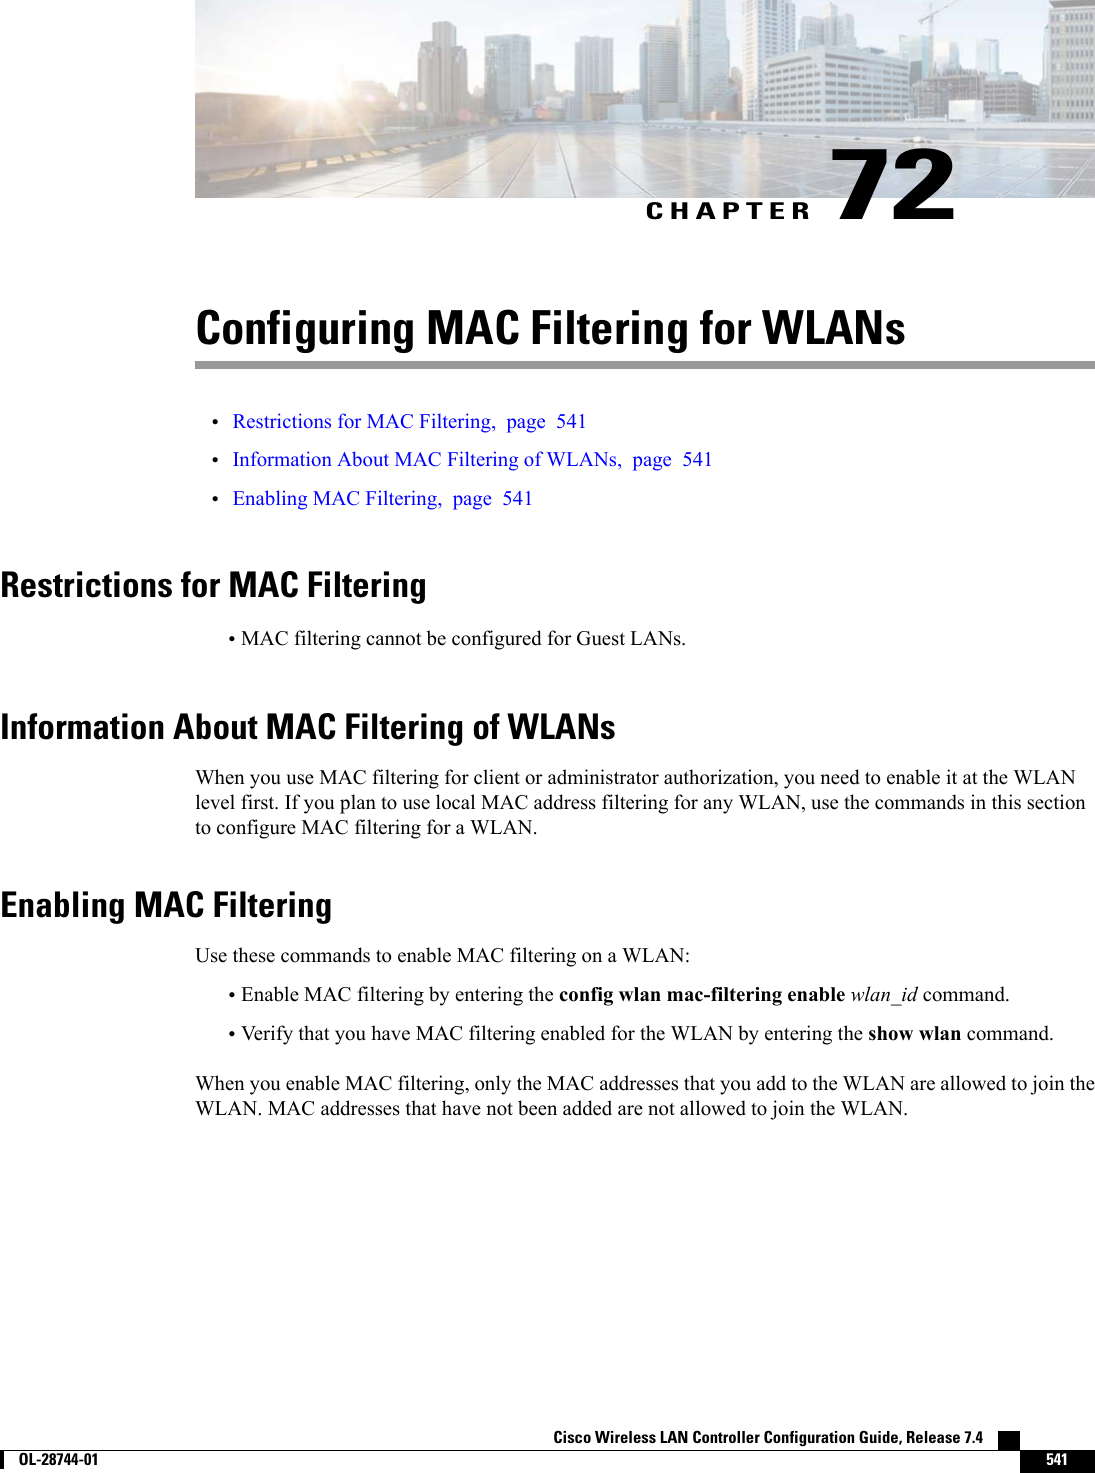 CHAPTER 72Configuring MAC Filtering for WLANs•Restrictions for MAC Filtering, page 541•Information About MAC Filtering of WLANs, page 541•Enabling MAC Filtering, page 541Restrictions for MAC Filtering•MAC filtering cannot be configured for Guest LANs.Information About MAC Filtering of WLANsWhen you use MAC filtering for client or administrator authorization, you need to enable it at the WLANlevel first. If you plan to use local MAC address filtering for any WLAN, use the commands in this sectionto configure MAC filtering for a WLAN.Enabling MAC FilteringUse these commands to enable MAC filtering on a WLAN:•Enable MAC filtering by entering the config wlan mac-filtering enable wlan_id command.•Verify that you have MAC filtering enabled for the WLAN by entering the show wlan command.When you enable MAC filtering, only the MAC addresses that you add to the WLAN are allowed to join theWLAN. MAC addresses that have not been added are not allowed to join the WLAN.Cisco Wireless LAN Controller Configuration Guide, Release 7.4        OL-28744-01 541